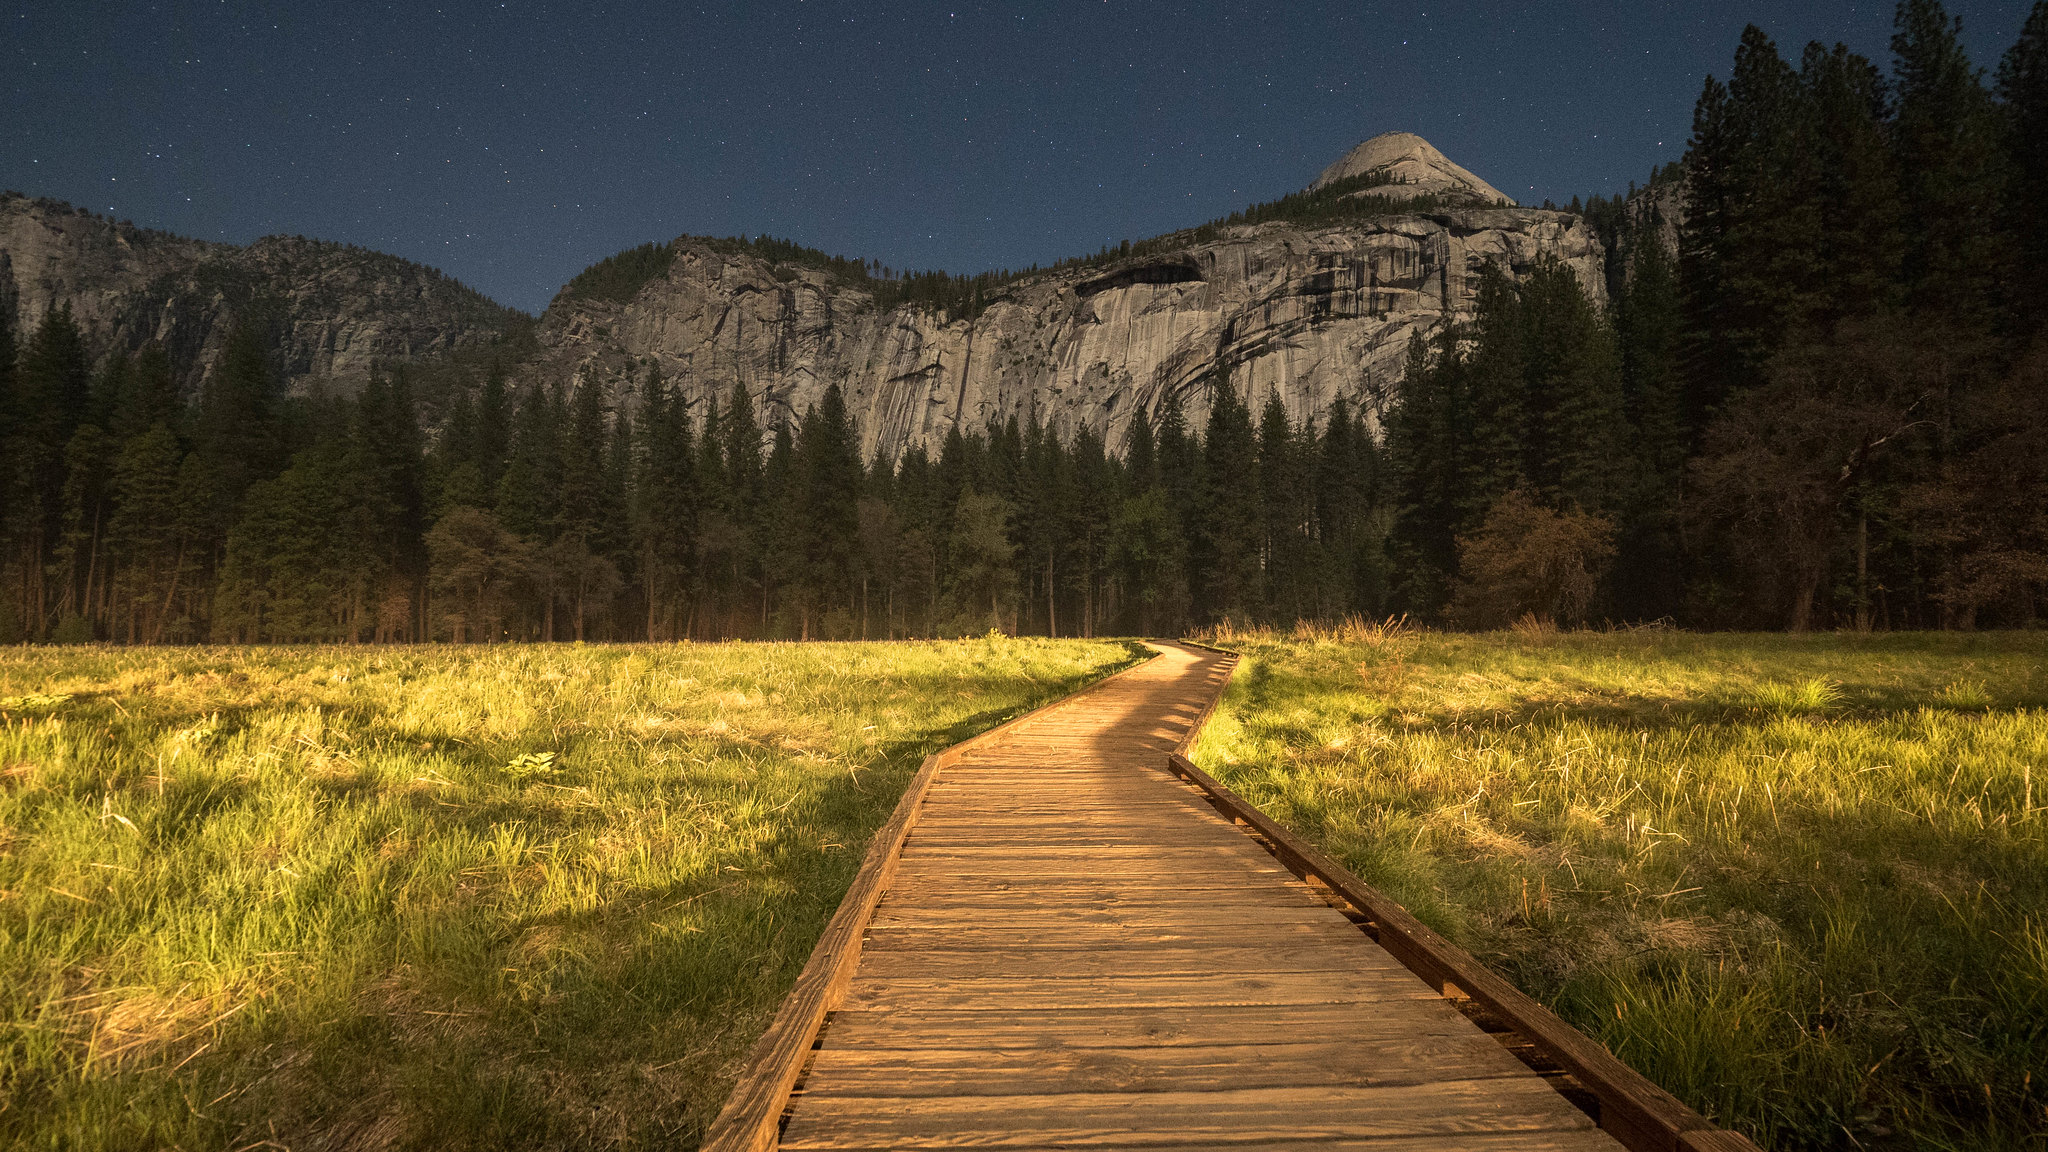 General 2048x1152 mountains grass path nature field forest forest clearing long exposure trees Yosemite National Park